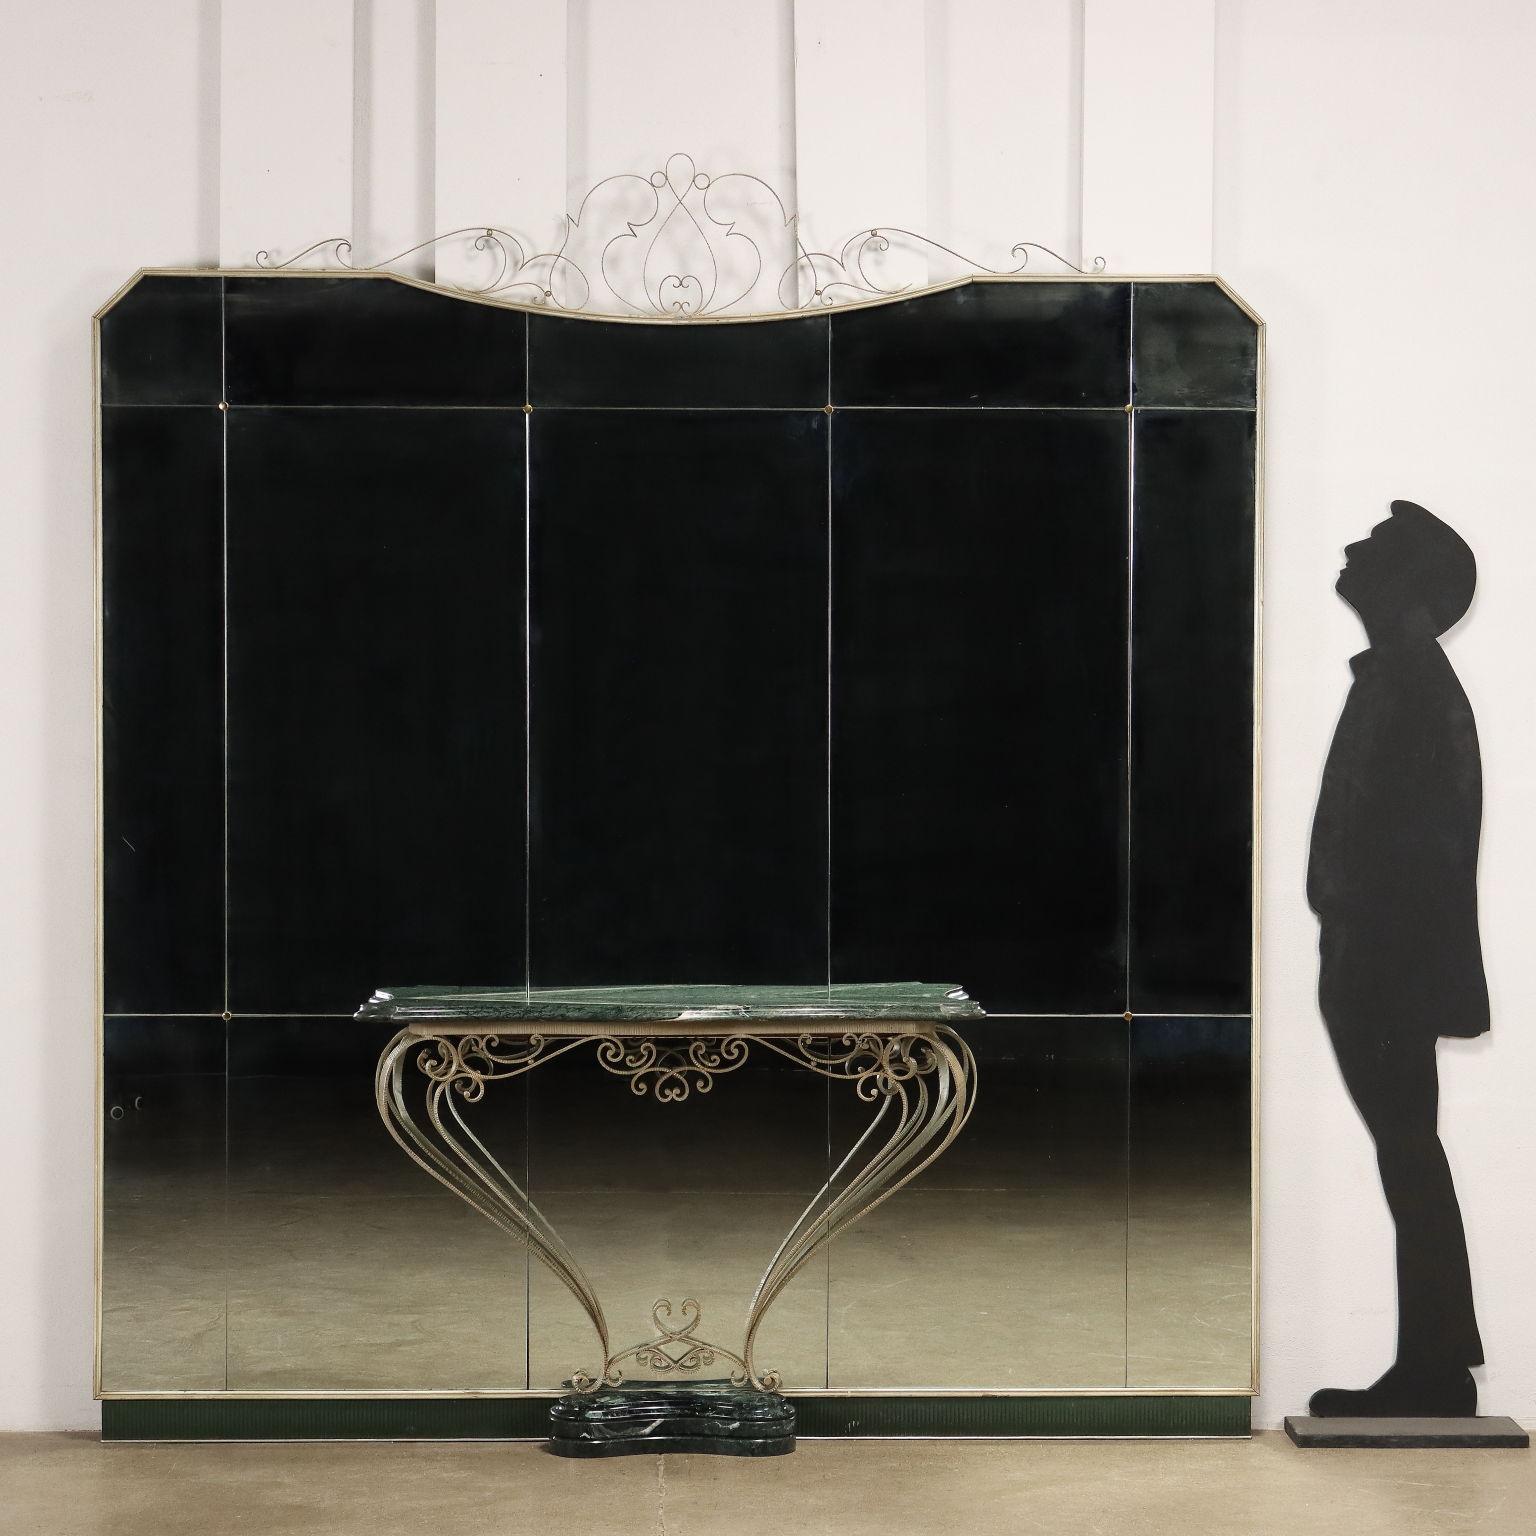 Mirror with console table, made of wrought iron, green marble, lacquered wood and mirrored glass. Restaurata.